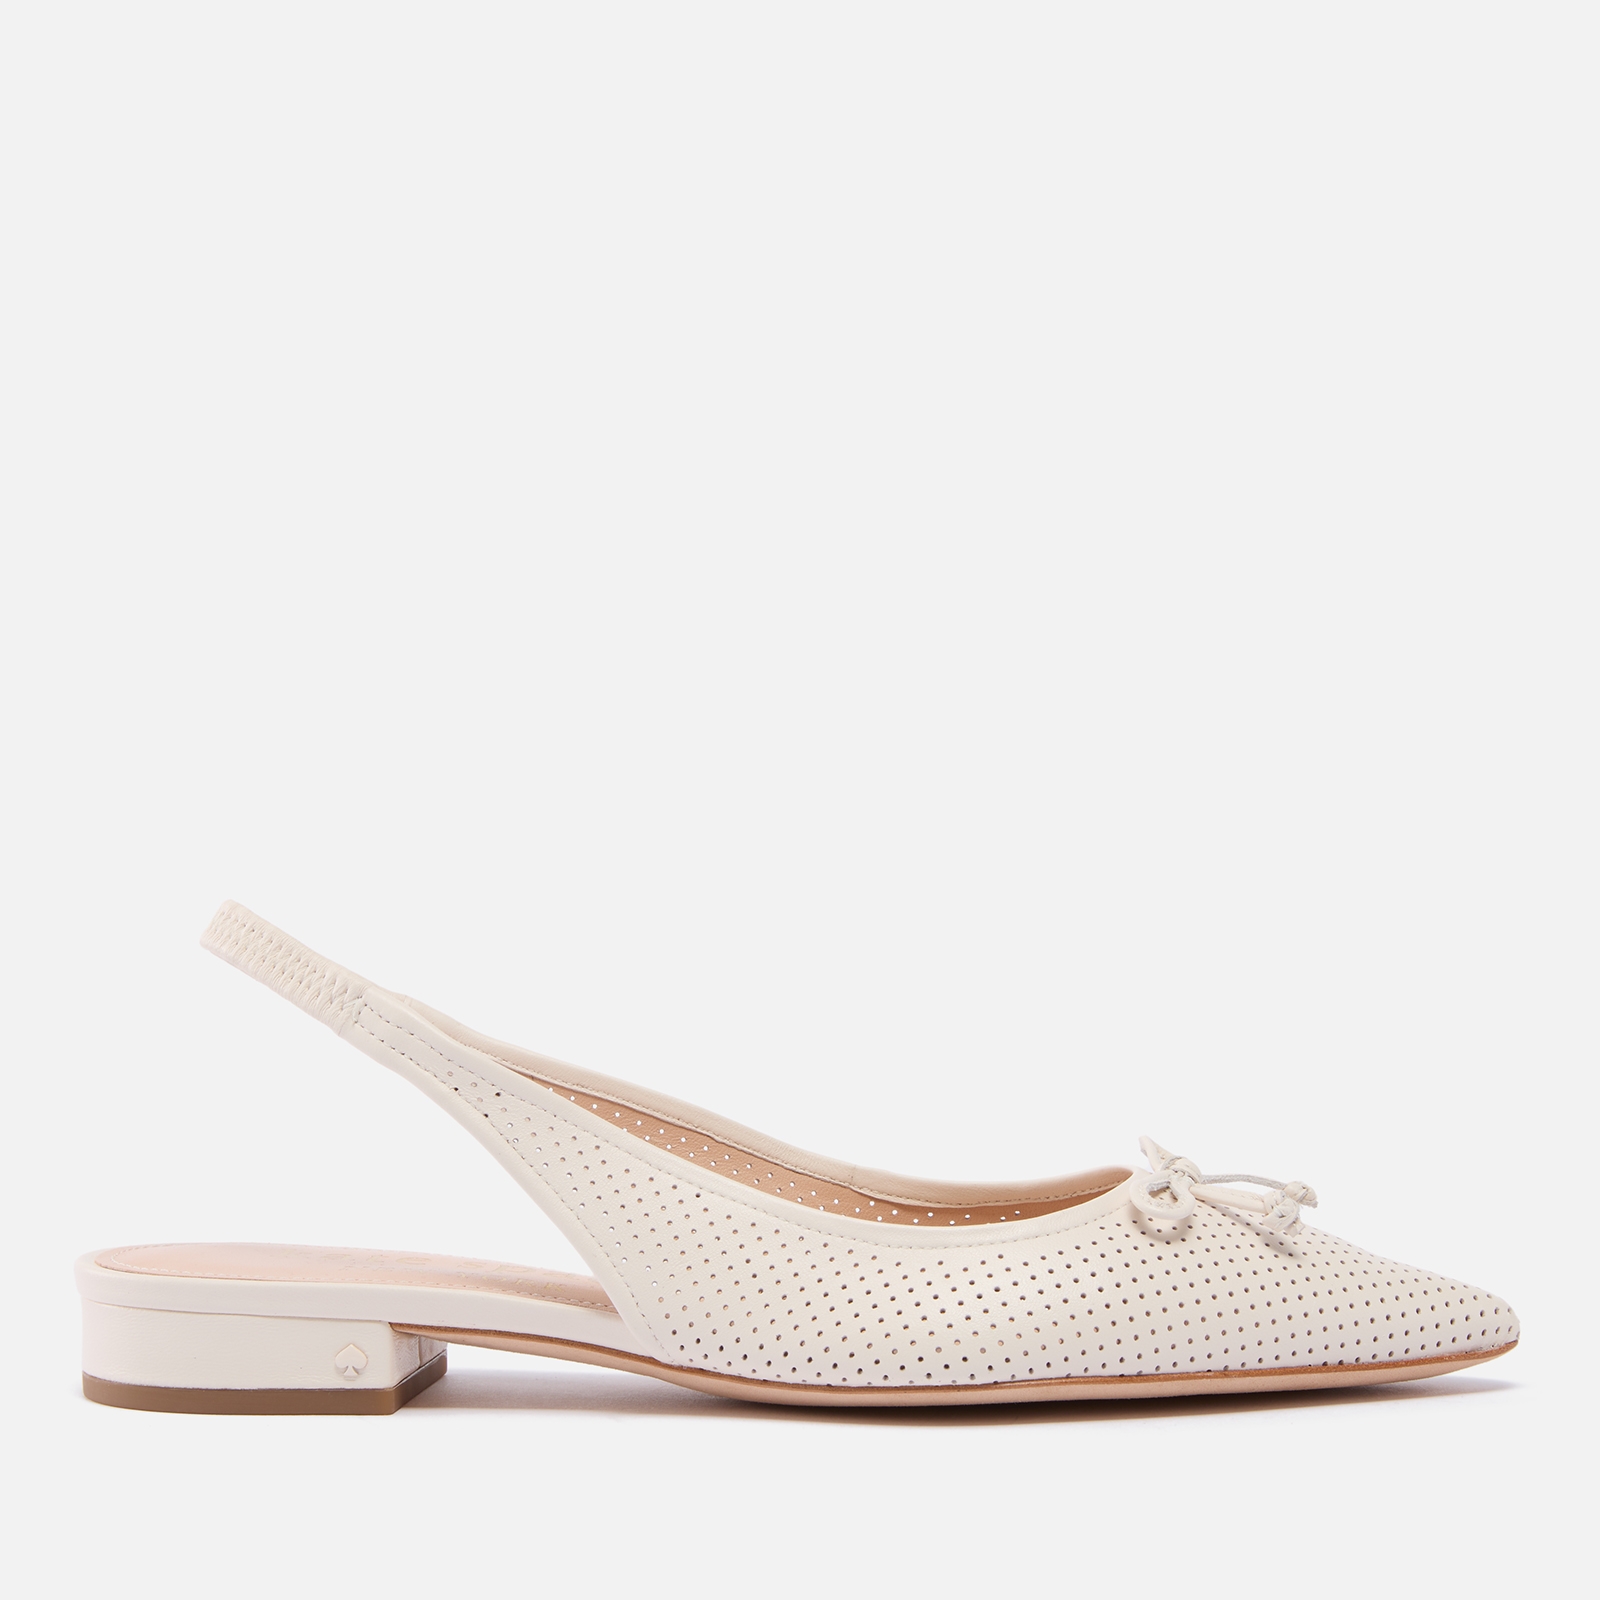 Kate Spade New York Women’s Veronica Nappa Leather Flat Shoes